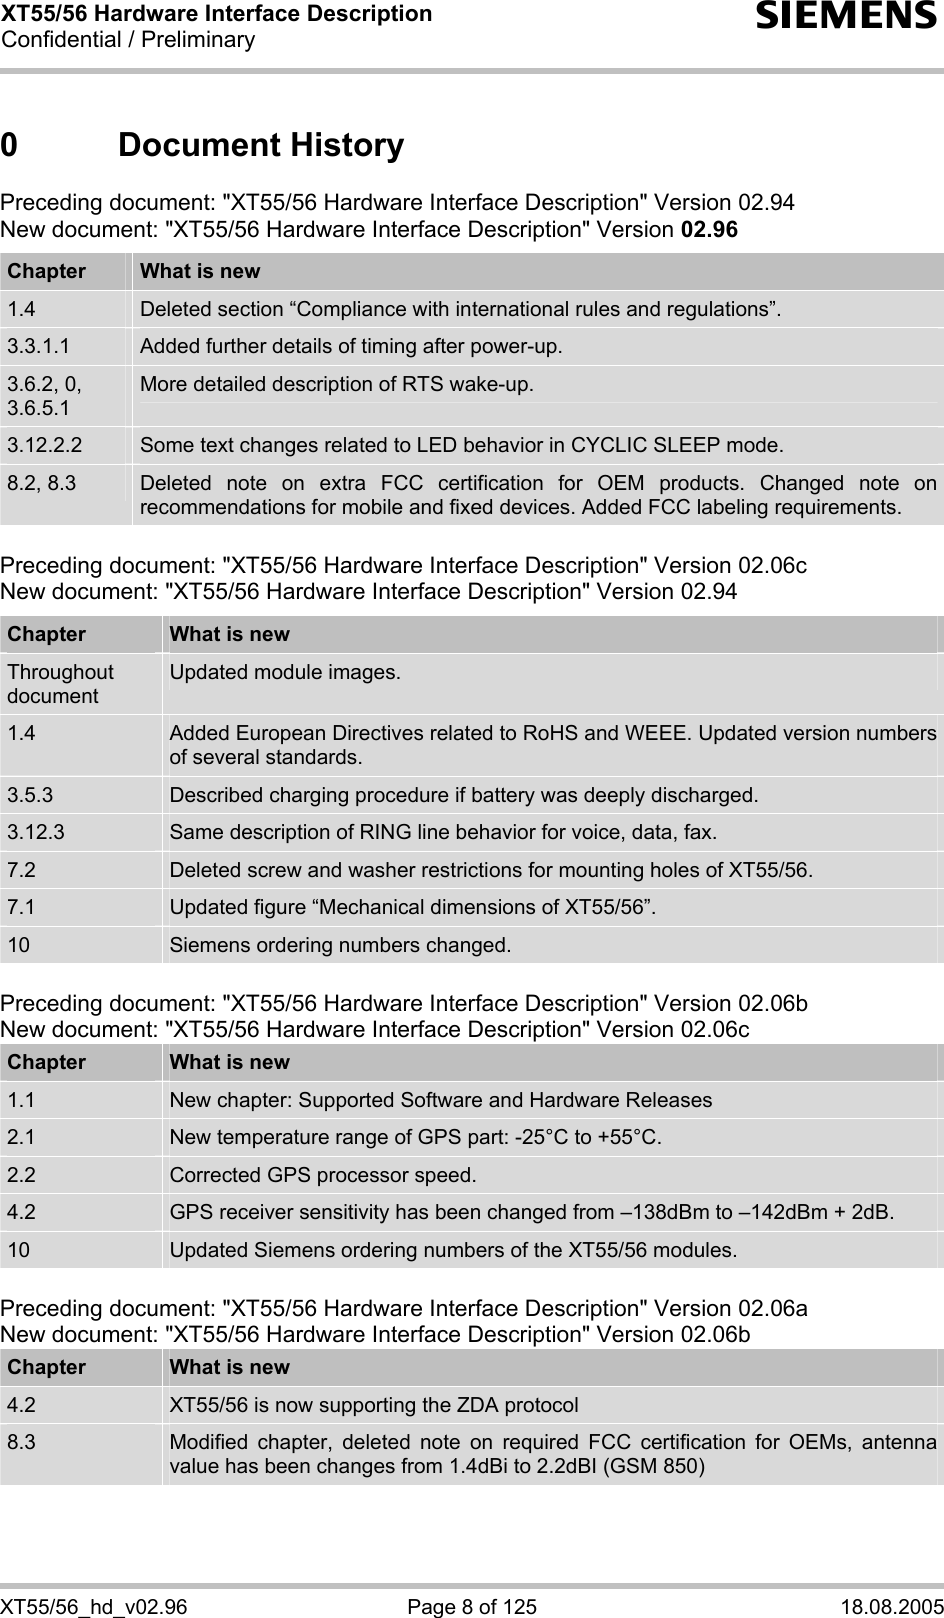 XT55/56 Hardware Interface Description Confidential / Preliminary s XT55/56_hd_v02.96  Page 8 of 125  18.08.2005 0 Document History Preceding document: &quot;XT55/56 Hardware Interface Description&quot; Version 02.94 New document: &quot;XT55/56 Hardware Interface Description&quot; Version 02.96  Chapter  What is new 1.4  Deleted section “Compliance with international rules and regulations”. 3.3.1.1  Added further details of timing after power-up. 3.6.2, 0, 3.6.5.1 More detailed description of RTS wake-up. 3.12.2.2  Some text changes related to LED behavior in CYCLIC SLEEP mode. 8.2, 8.3  Deleted note on extra FCC certification for OEM products. Changed note on recommendations for mobile and fixed devices. Added FCC labeling requirements.  Preceding document: &quot;XT55/56 Hardware Interface Description&quot; Version 02.06c New document: &quot;XT55/56 Hardware Interface Description&quot; Version 02.94  Chapter  What is new Throughout document Updated module images. 1.4  Added European Directives related to RoHS and WEEE. Updated version numbers of several standards. 3.5.3  Described charging procedure if battery was deeply discharged. 3.12.3  Same description of RING line behavior for voice, data, fax. 7.2  Deleted screw and washer restrictions for mounting holes of XT55/56. 7.1  Updated figure “Mechanical dimensions of XT55/56”. 10  Siemens ordering numbers changed.  Preceding document: &quot;XT55/56 Hardware Interface Description&quot; Version 02.06b New document: &quot;XT55/56 Hardware Interface Description&quot; Version 02.06c Chapter  What is new 1.1  New chapter: Supported Software and Hardware Releases 2.1  New temperature range of GPS part: -25°C to +55°C. 2.2  Corrected GPS processor speed. 4.2  GPS receiver sensitivity has been changed from –138dBm to –142dBm + 2dB. 10  Updated Siemens ordering numbers of the XT55/56 modules.  Preceding document: &quot;XT55/56 Hardware Interface Description&quot; Version 02.06a New document: &quot;XT55/56 Hardware Interface Description&quot; Version 02.06b Chapter  What is new 4.2  XT55/56 is now supporting the ZDA protocol 8.3  Modified chapter, deleted note on required FCC certification for OEMs, antenna value has been changes from 1.4dBi to 2.2dBI (GSM 850)  